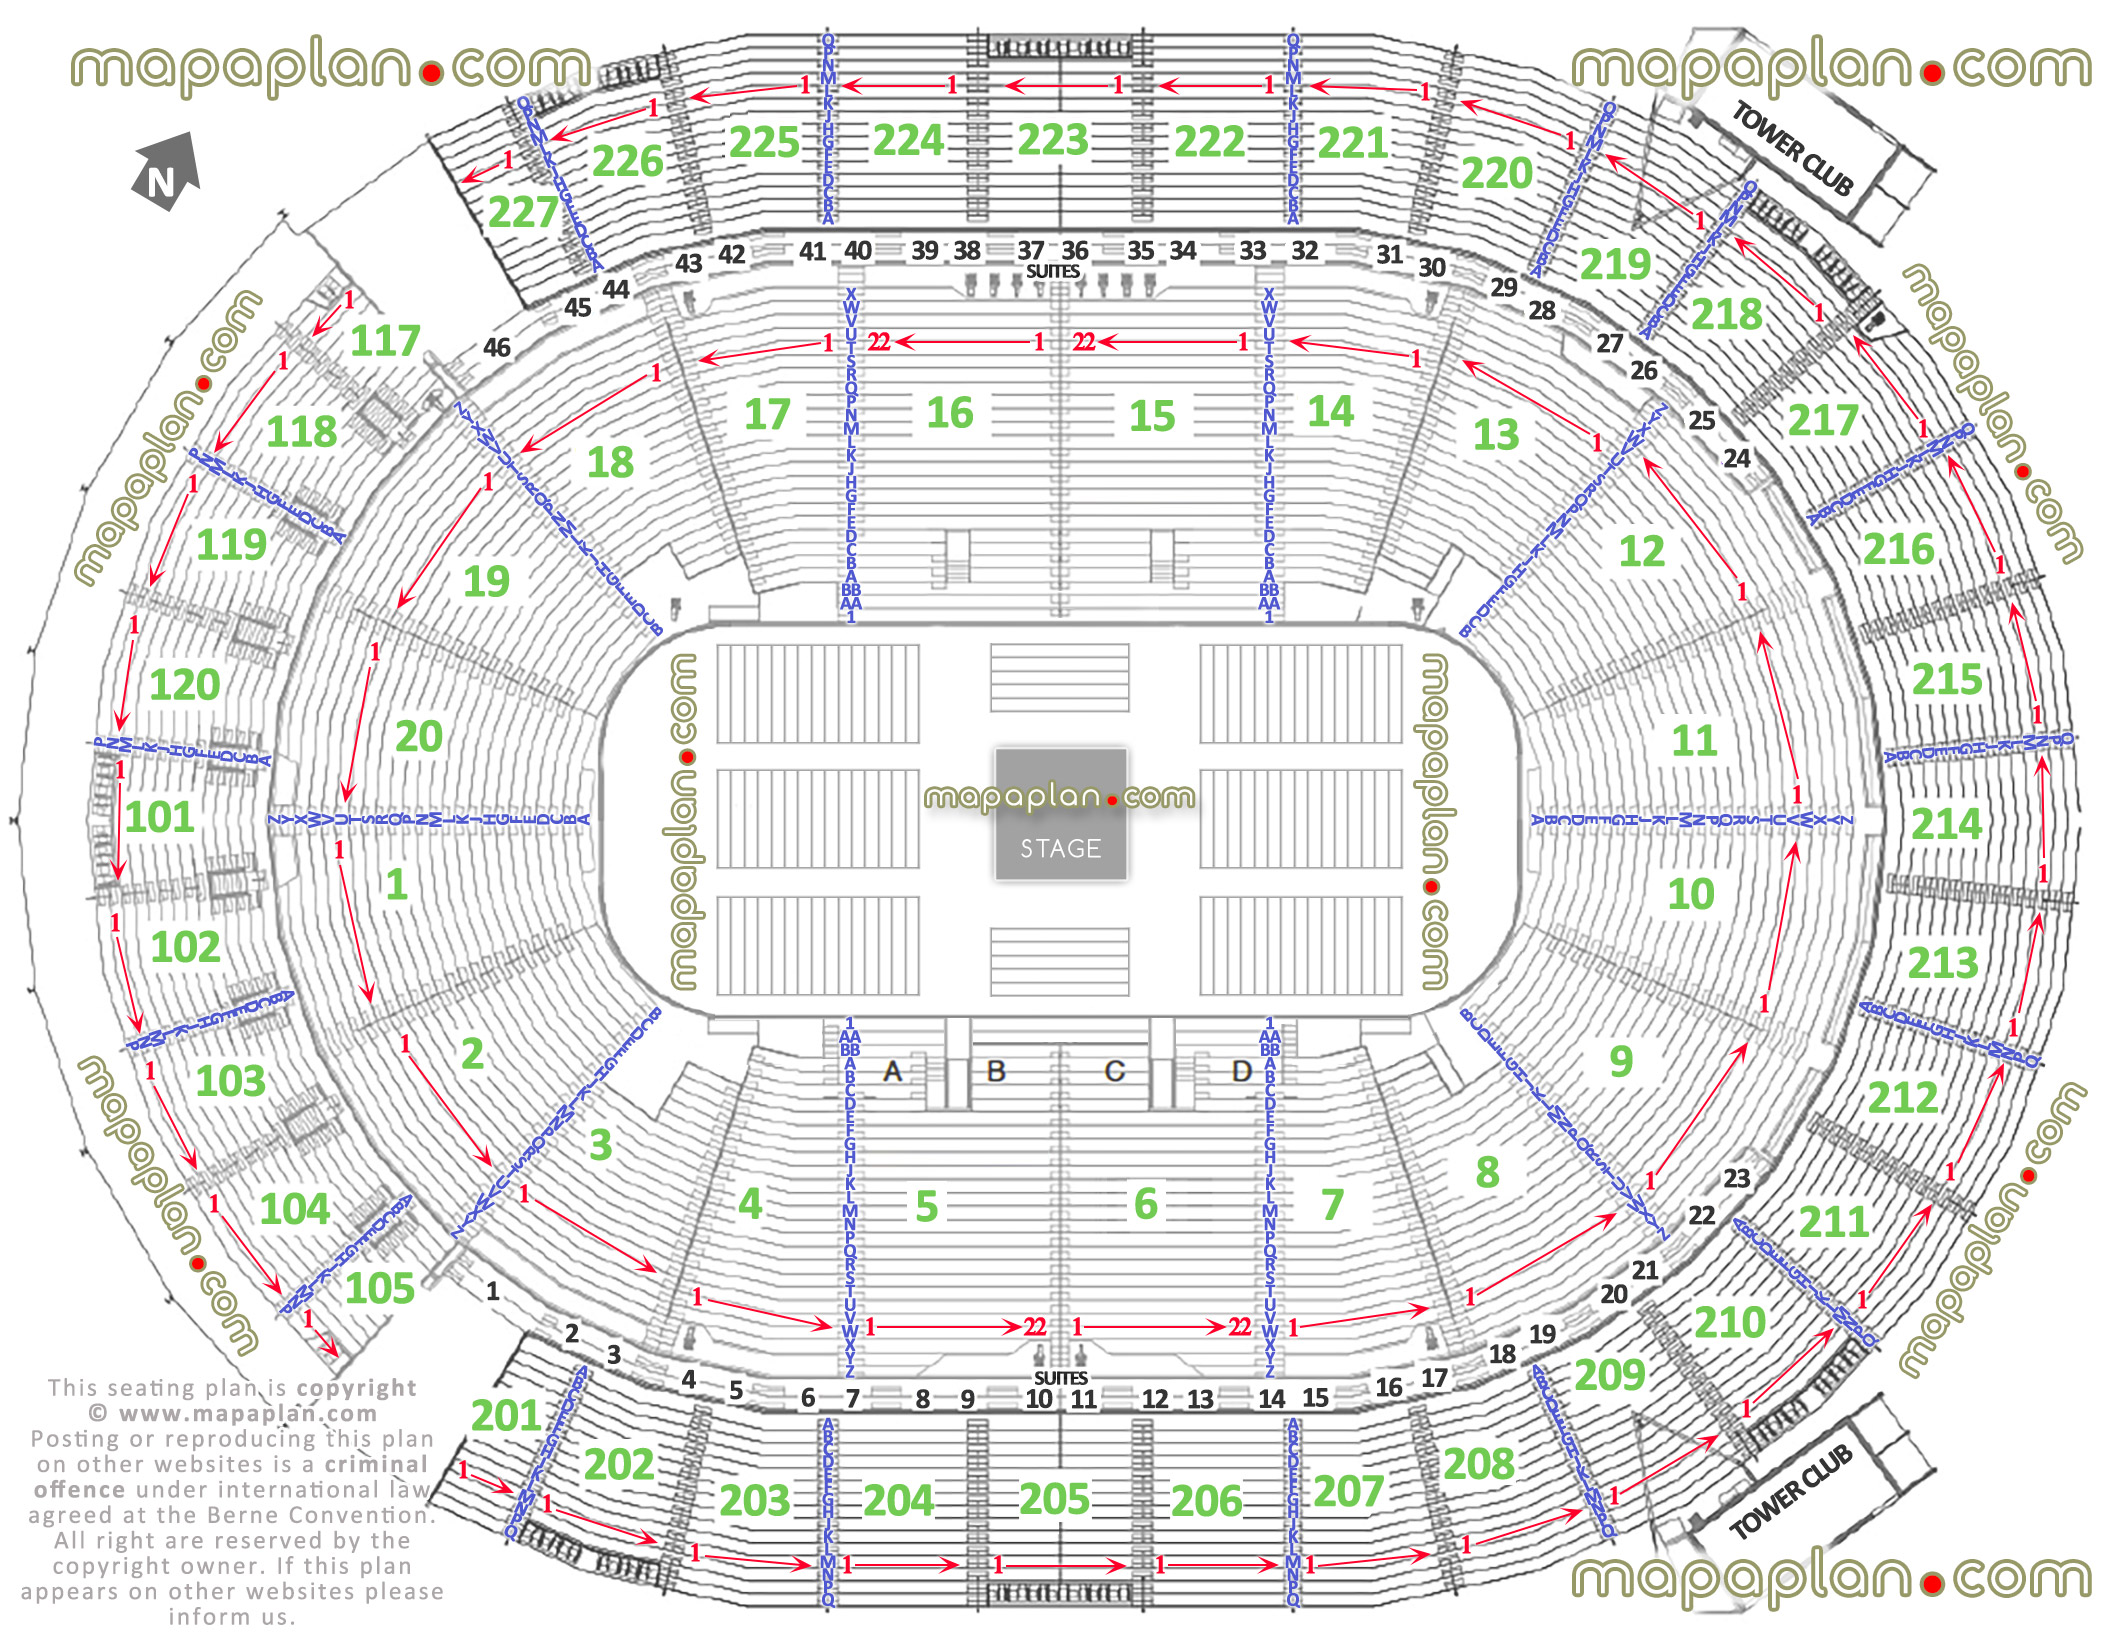 concert stage round printable virtual layout 360 degree arrangement interactive diagram seats row lower suites upper club tower level sections rows a b c d e f g h j k l m n p q r s t u v w x y z aa bb Las Vegas T-Mobile Arena Las Vegas T-Mobile Arena seating chart